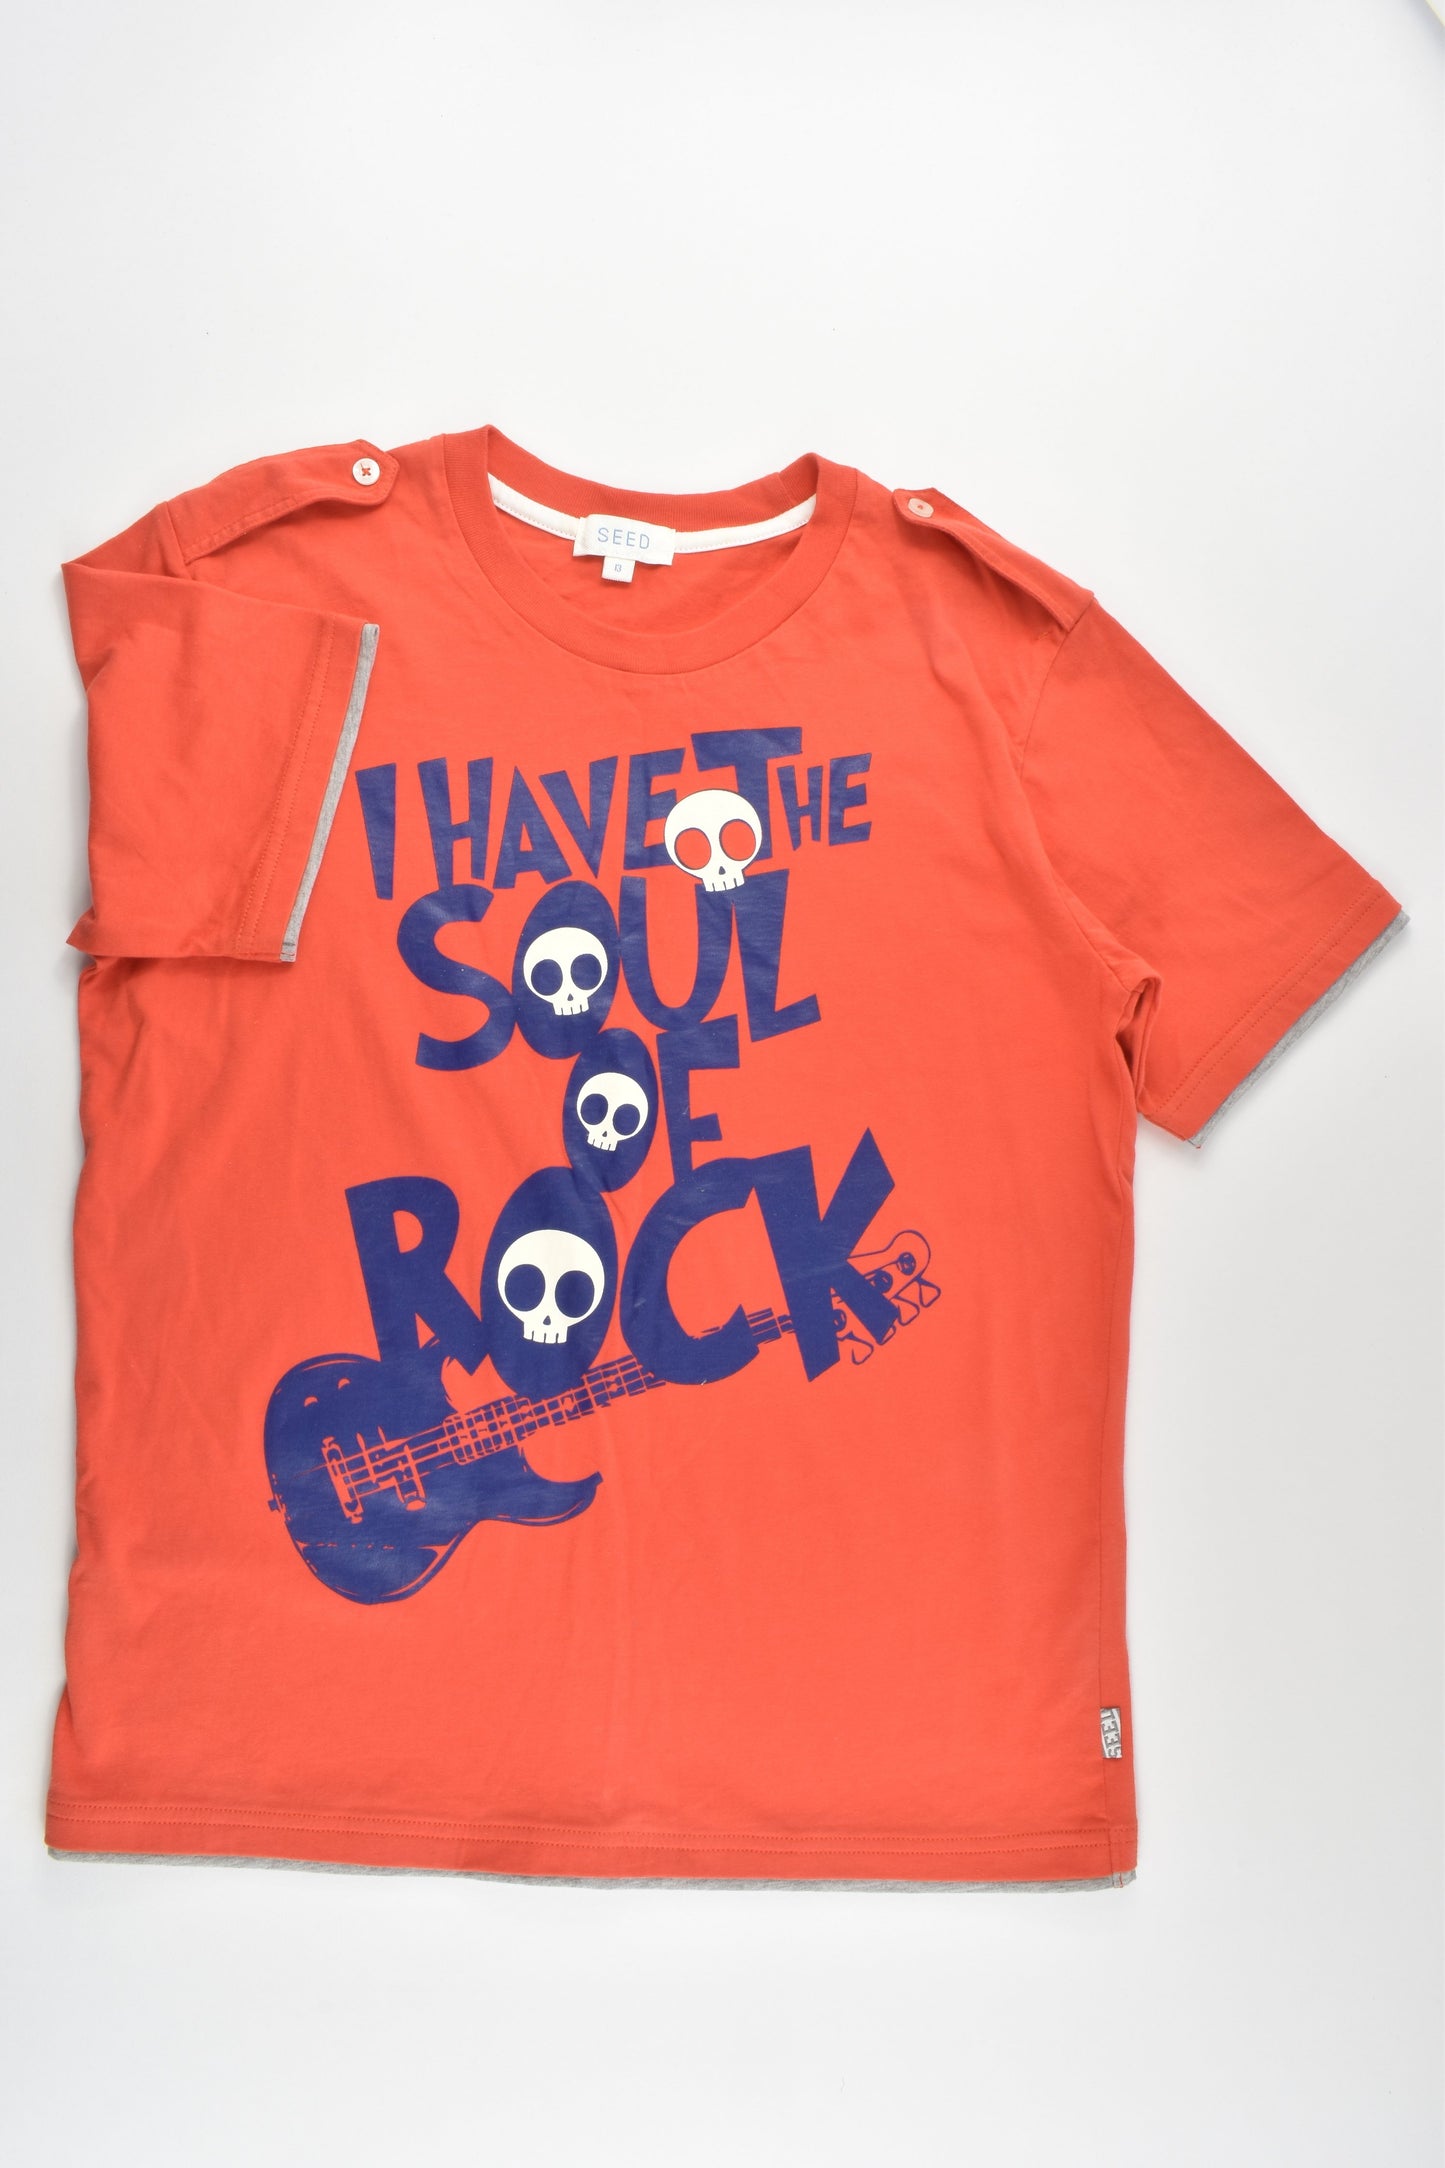 Seed Size 13 'I Have The Soul Of Rock' T-shirt